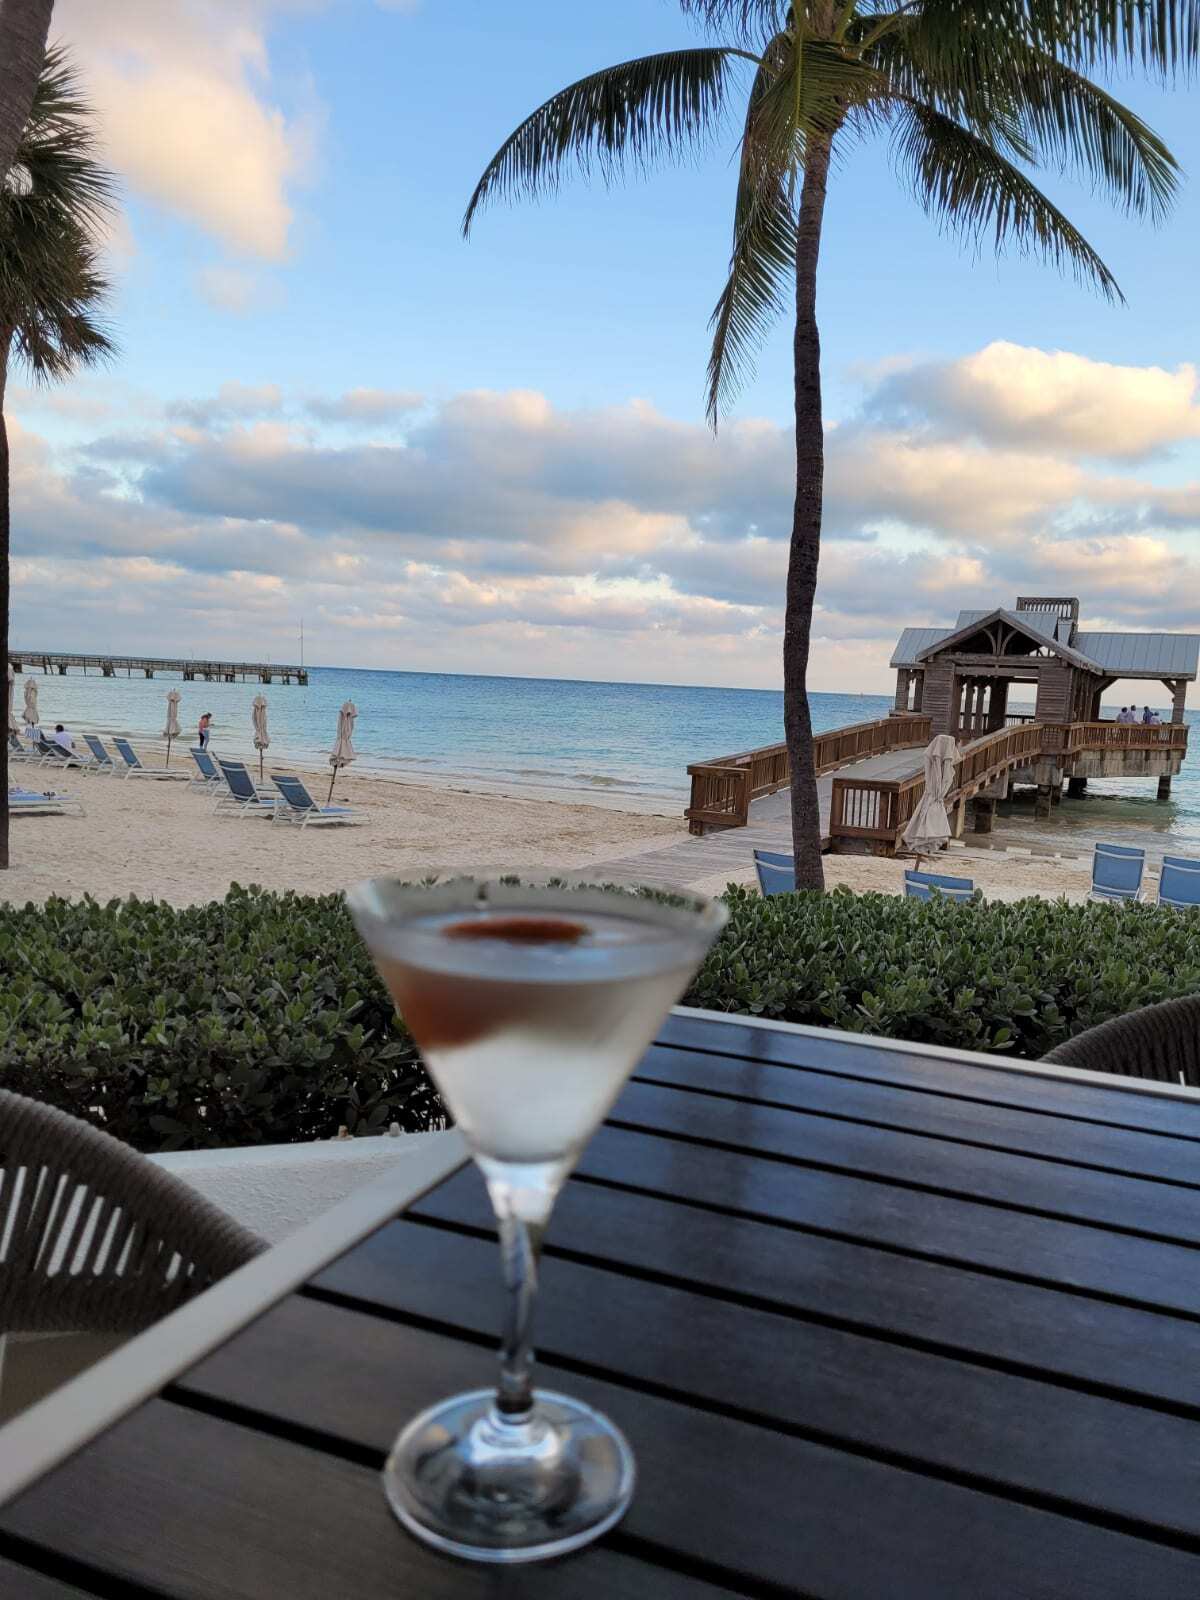 Martini with a cherry garnish overlooking the blue ocean and pier located at The Reach Resort Key West Florida